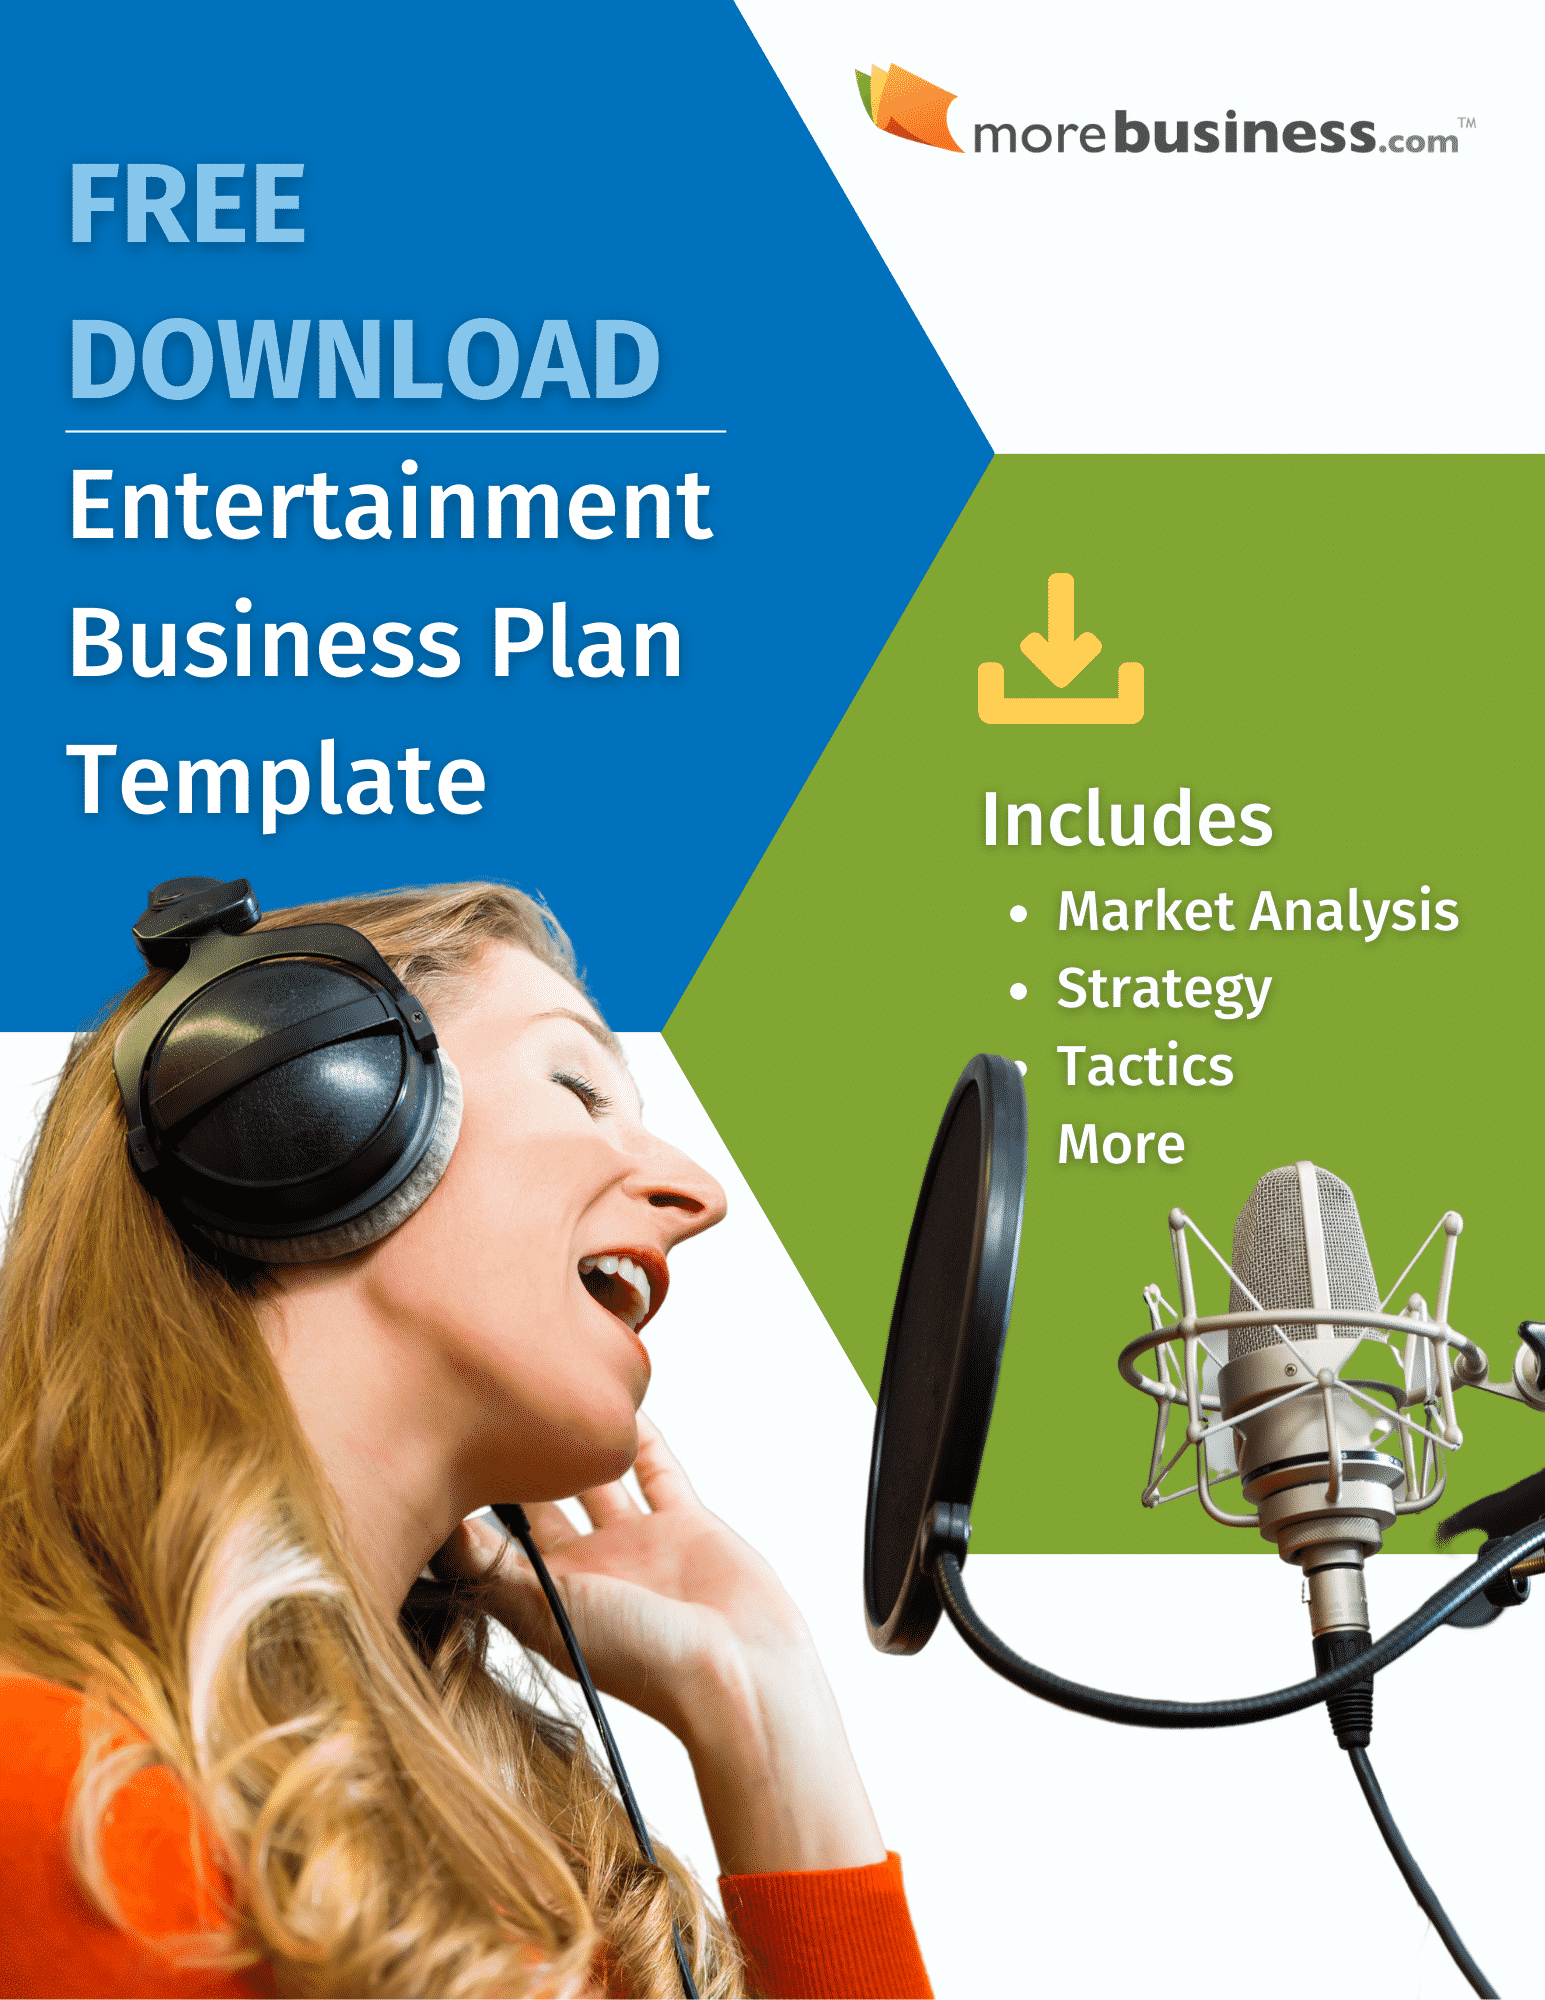 Entertainment Business Plan Example  MoreBusiness.com Pertaining To Independent Record Label Business Plan Template